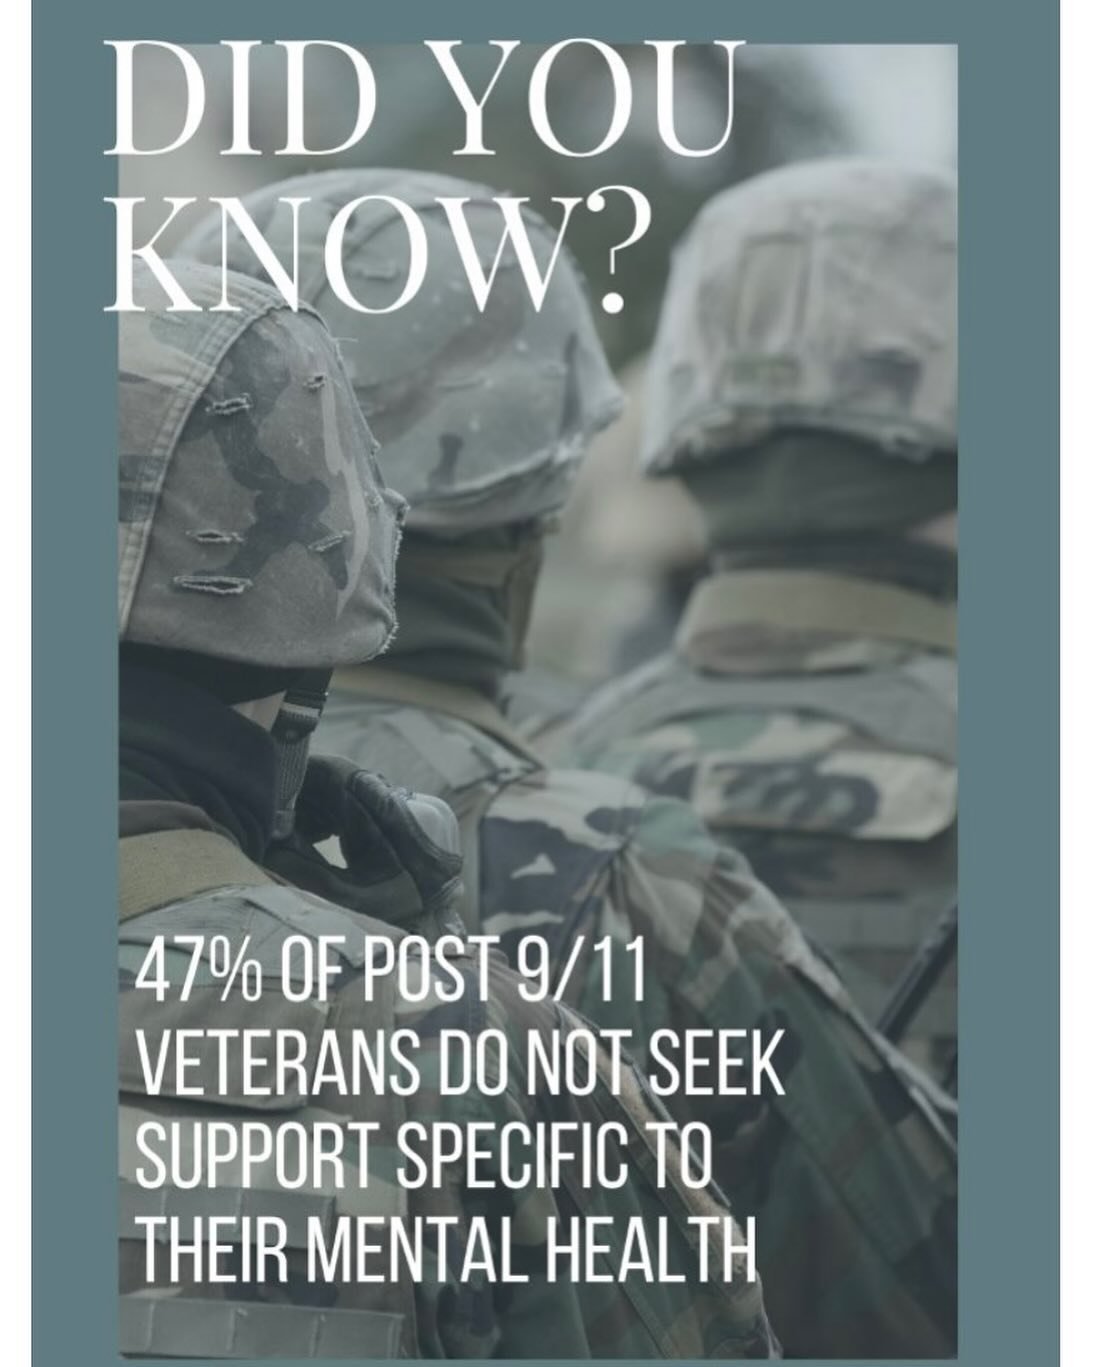 Veterans often hold back from seeking mental health support due to stigma, judgment fears, or worries about career implications. Let&rsquo;s unite to dismantle these barriers and provide the support and resources they rightfully deserve.
#Forwardwith